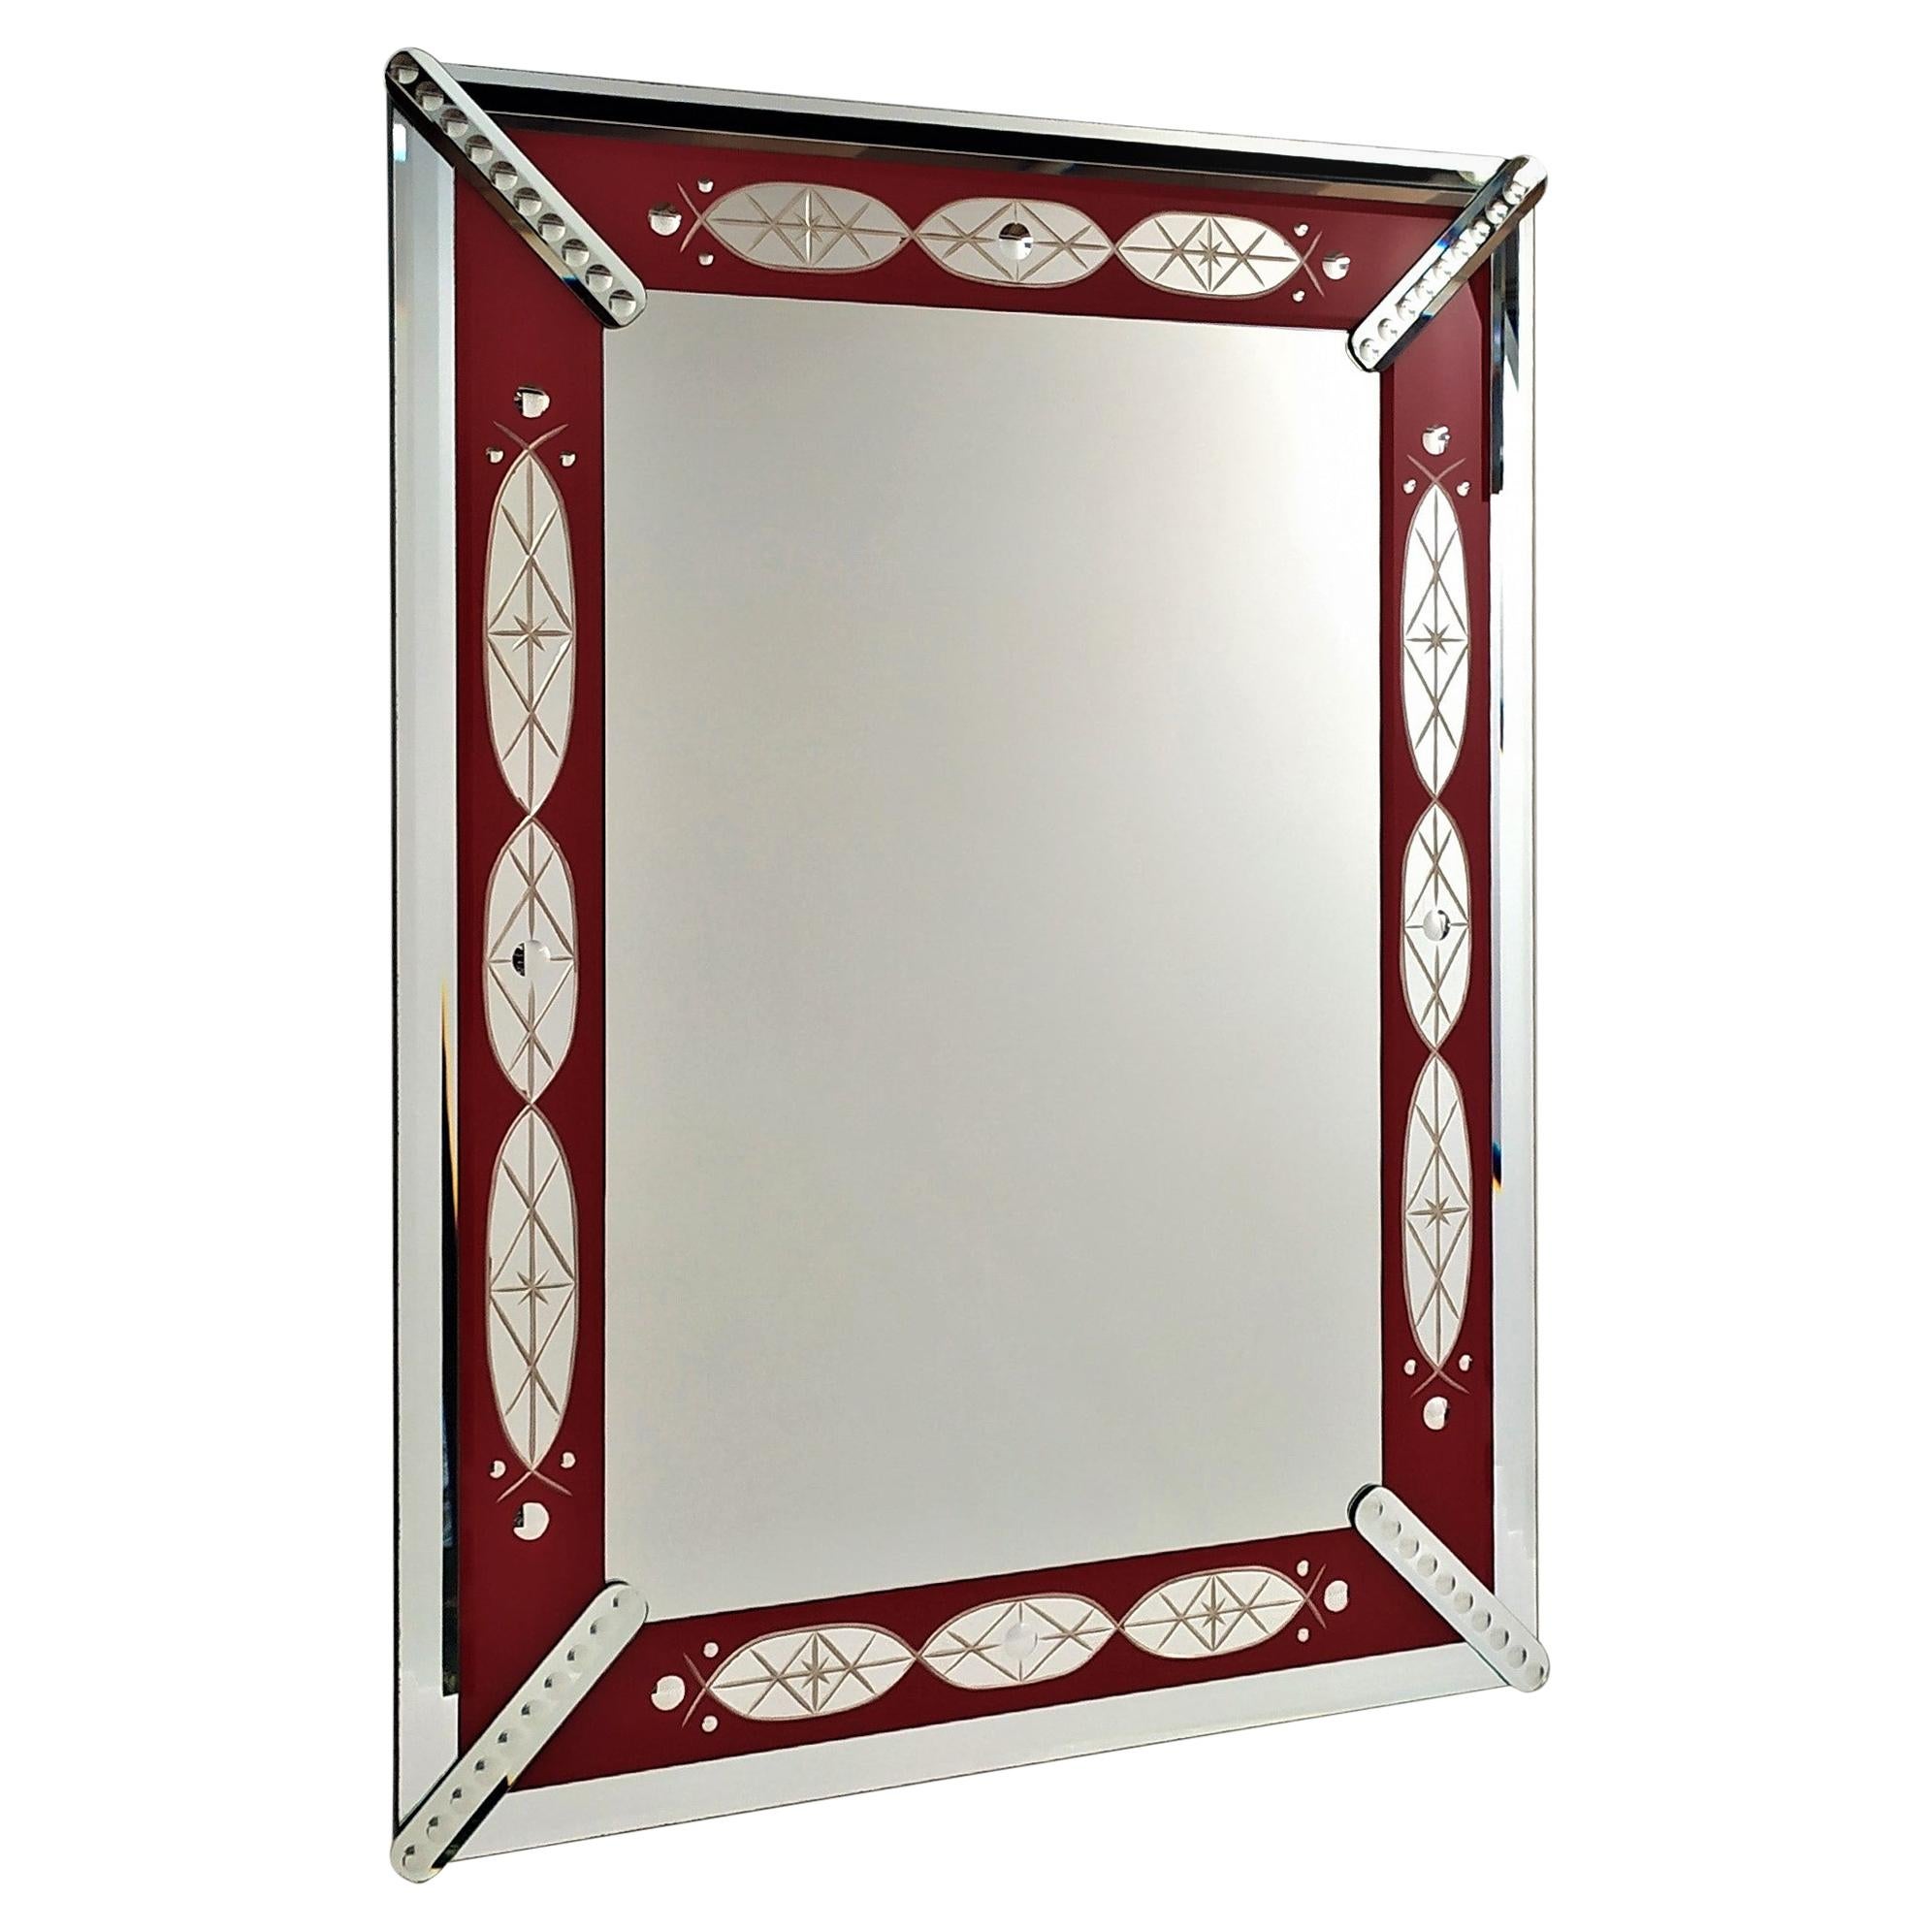 "Red Mirror" by Fratelli Tosi, Murano Glass Mirror, Handmade Made in Italy For Sale